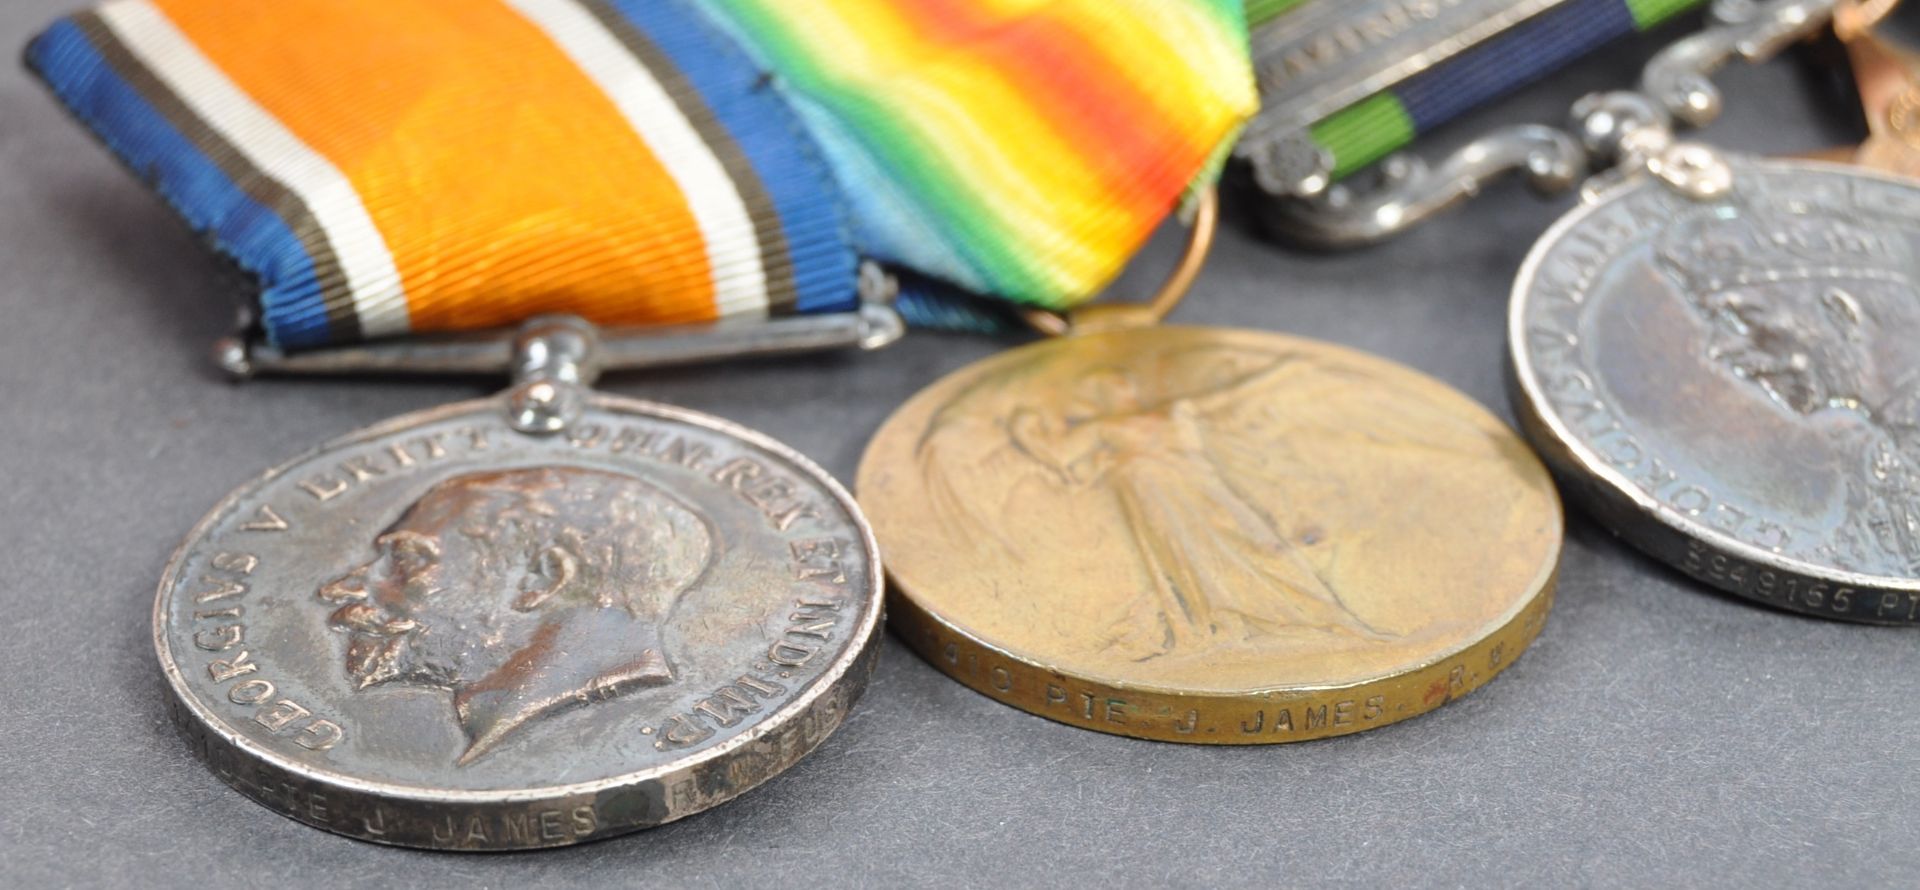 WWI & WWII MEDAL GROUP TO PRIVATE J. JAMES OF ROYAL WELCH FUSILIERS - Image 3 of 7